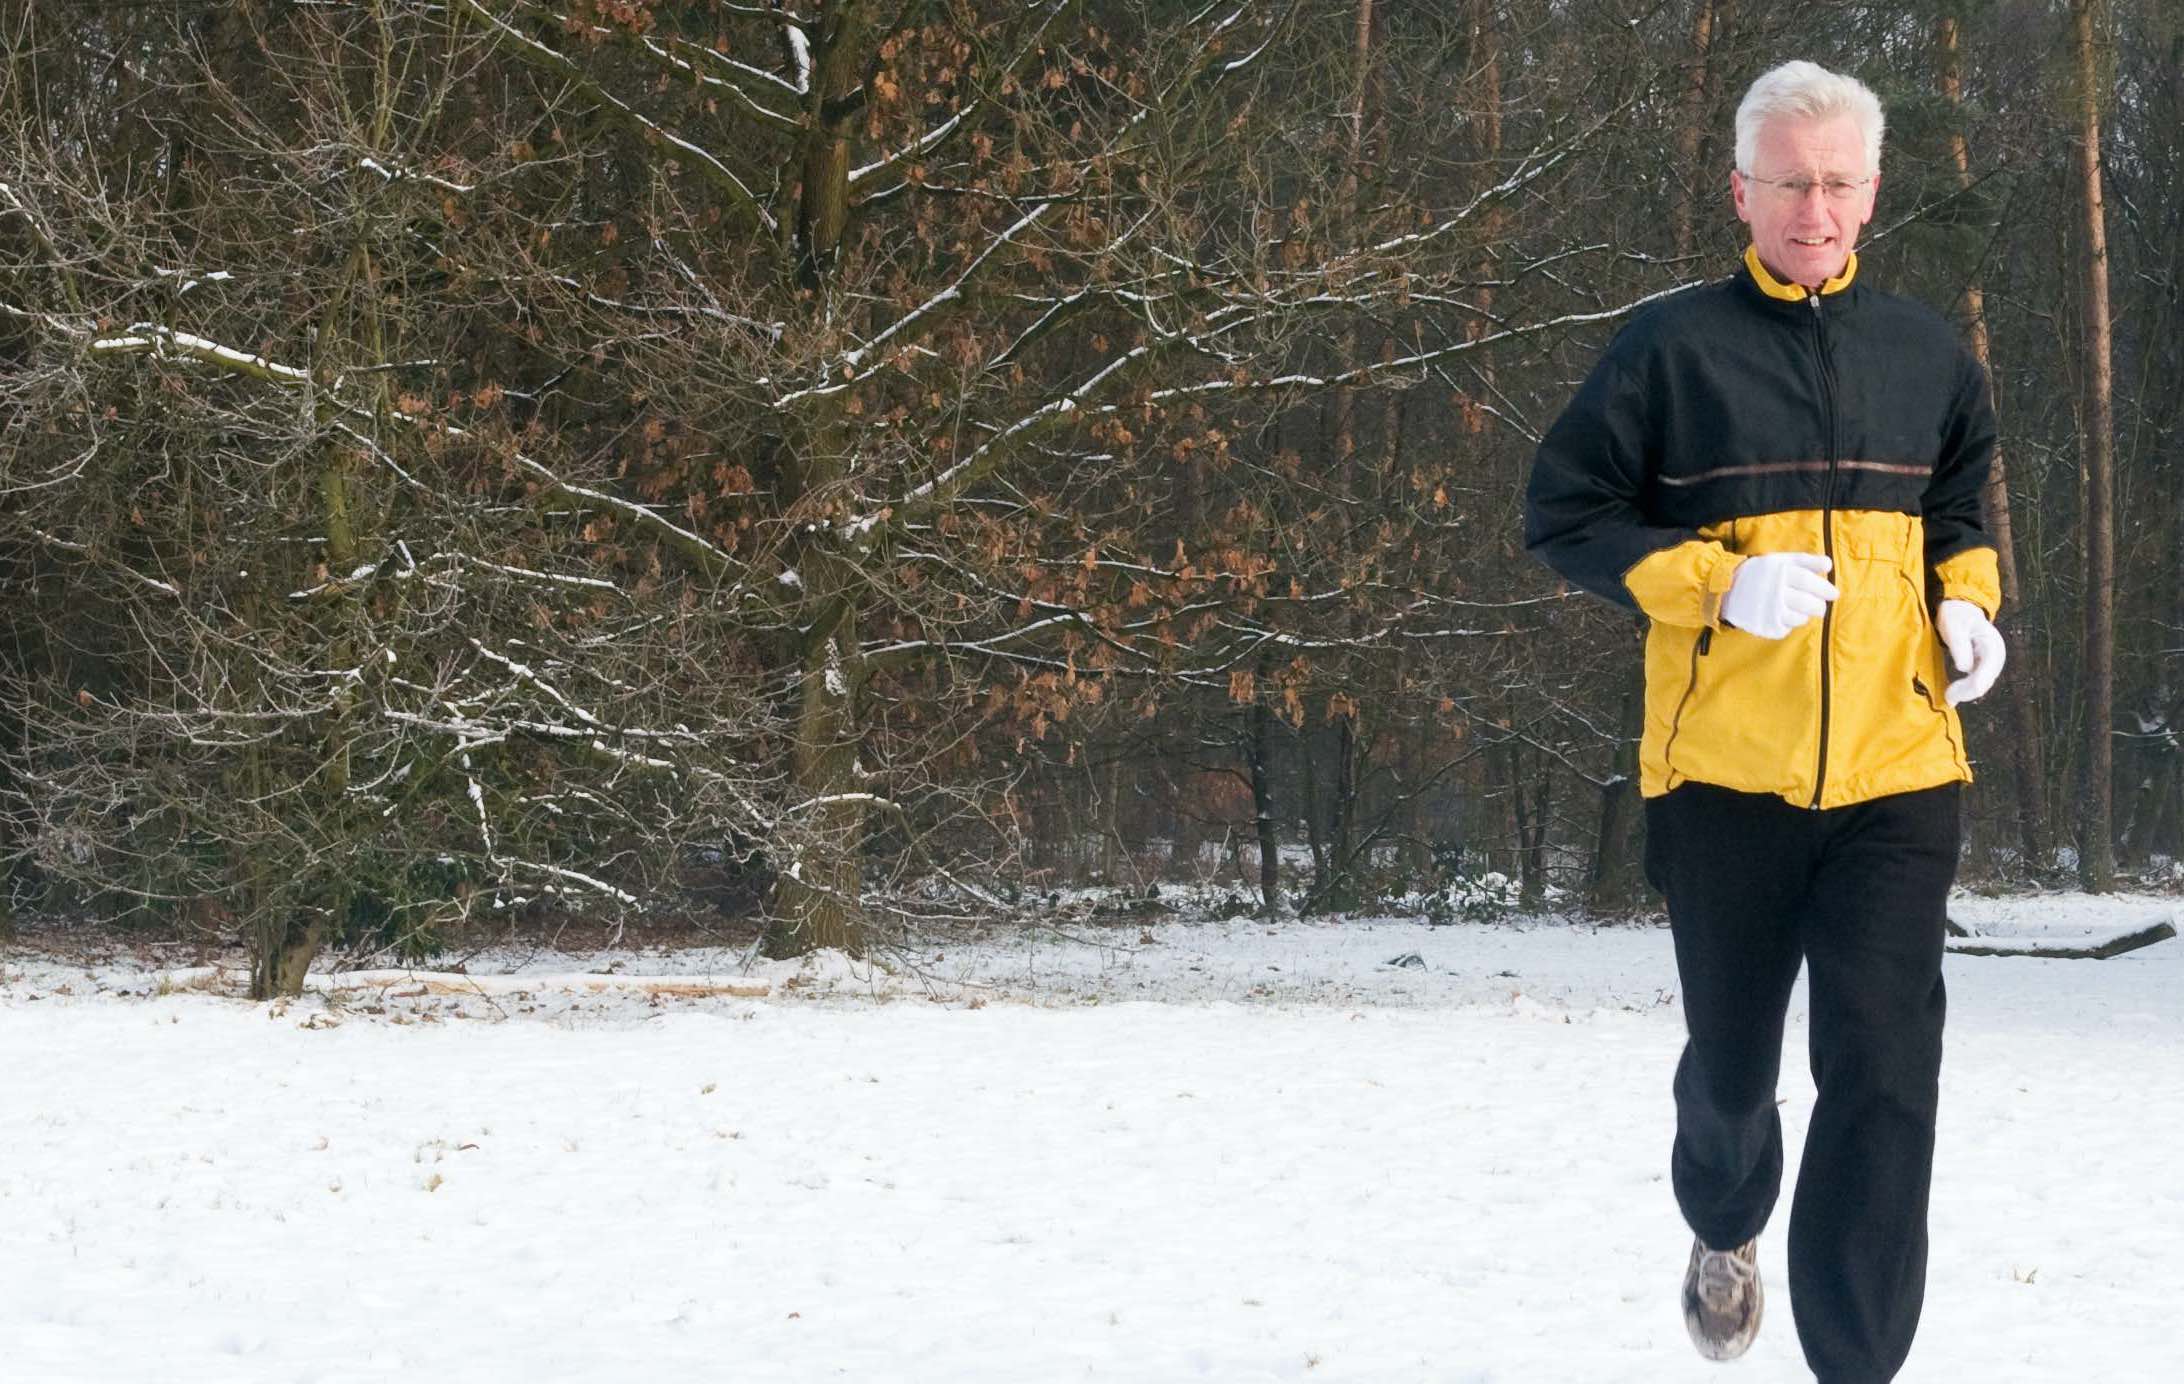 Are you running right? Here's how to exercise safe in the colder months